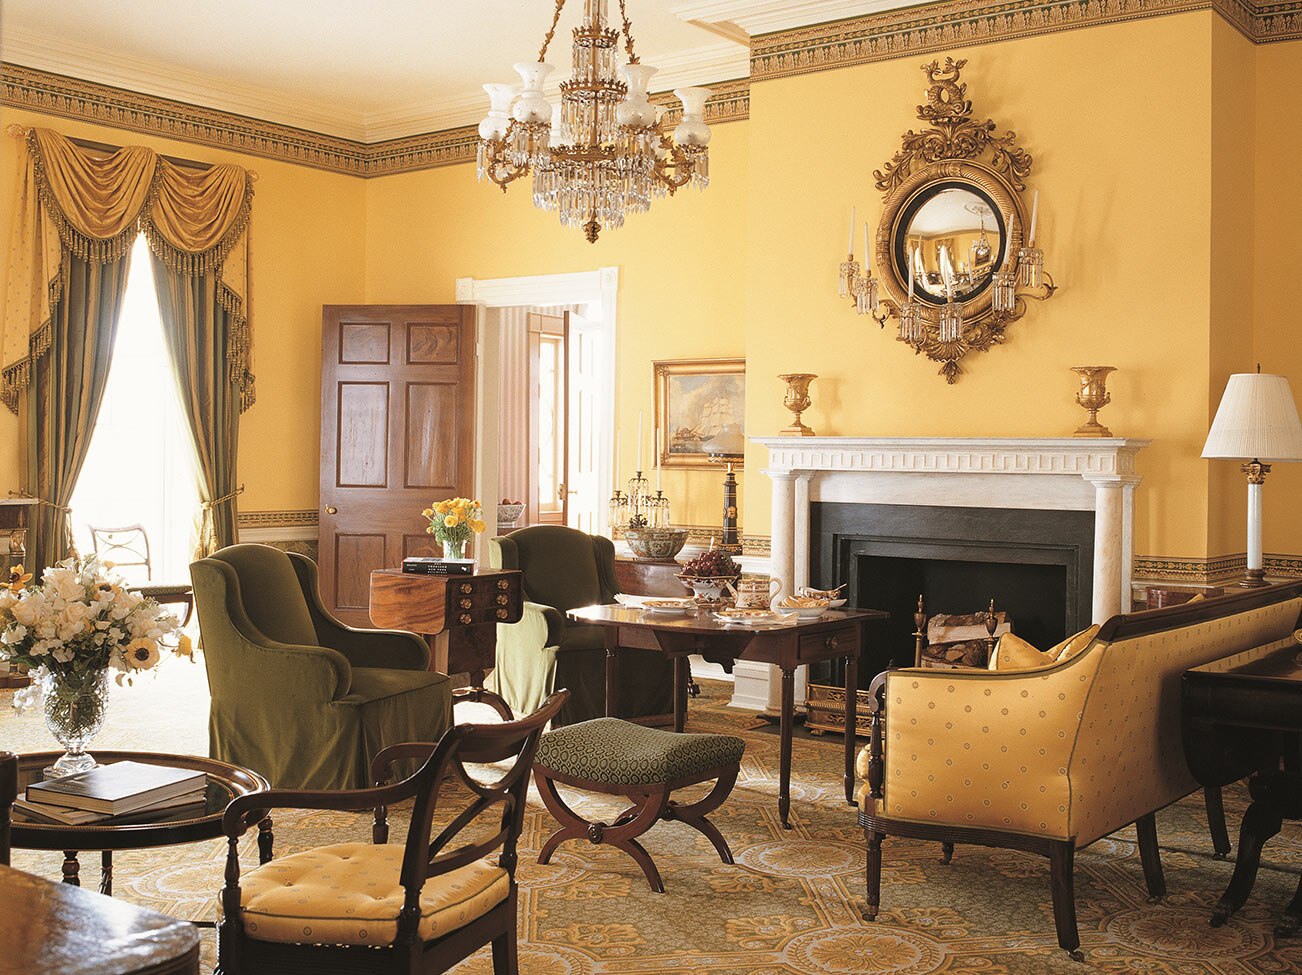   A lovely yellow parlor in Gracie Mansion, the mayorial residence of NYC, offers an exuberant take on traditional design.